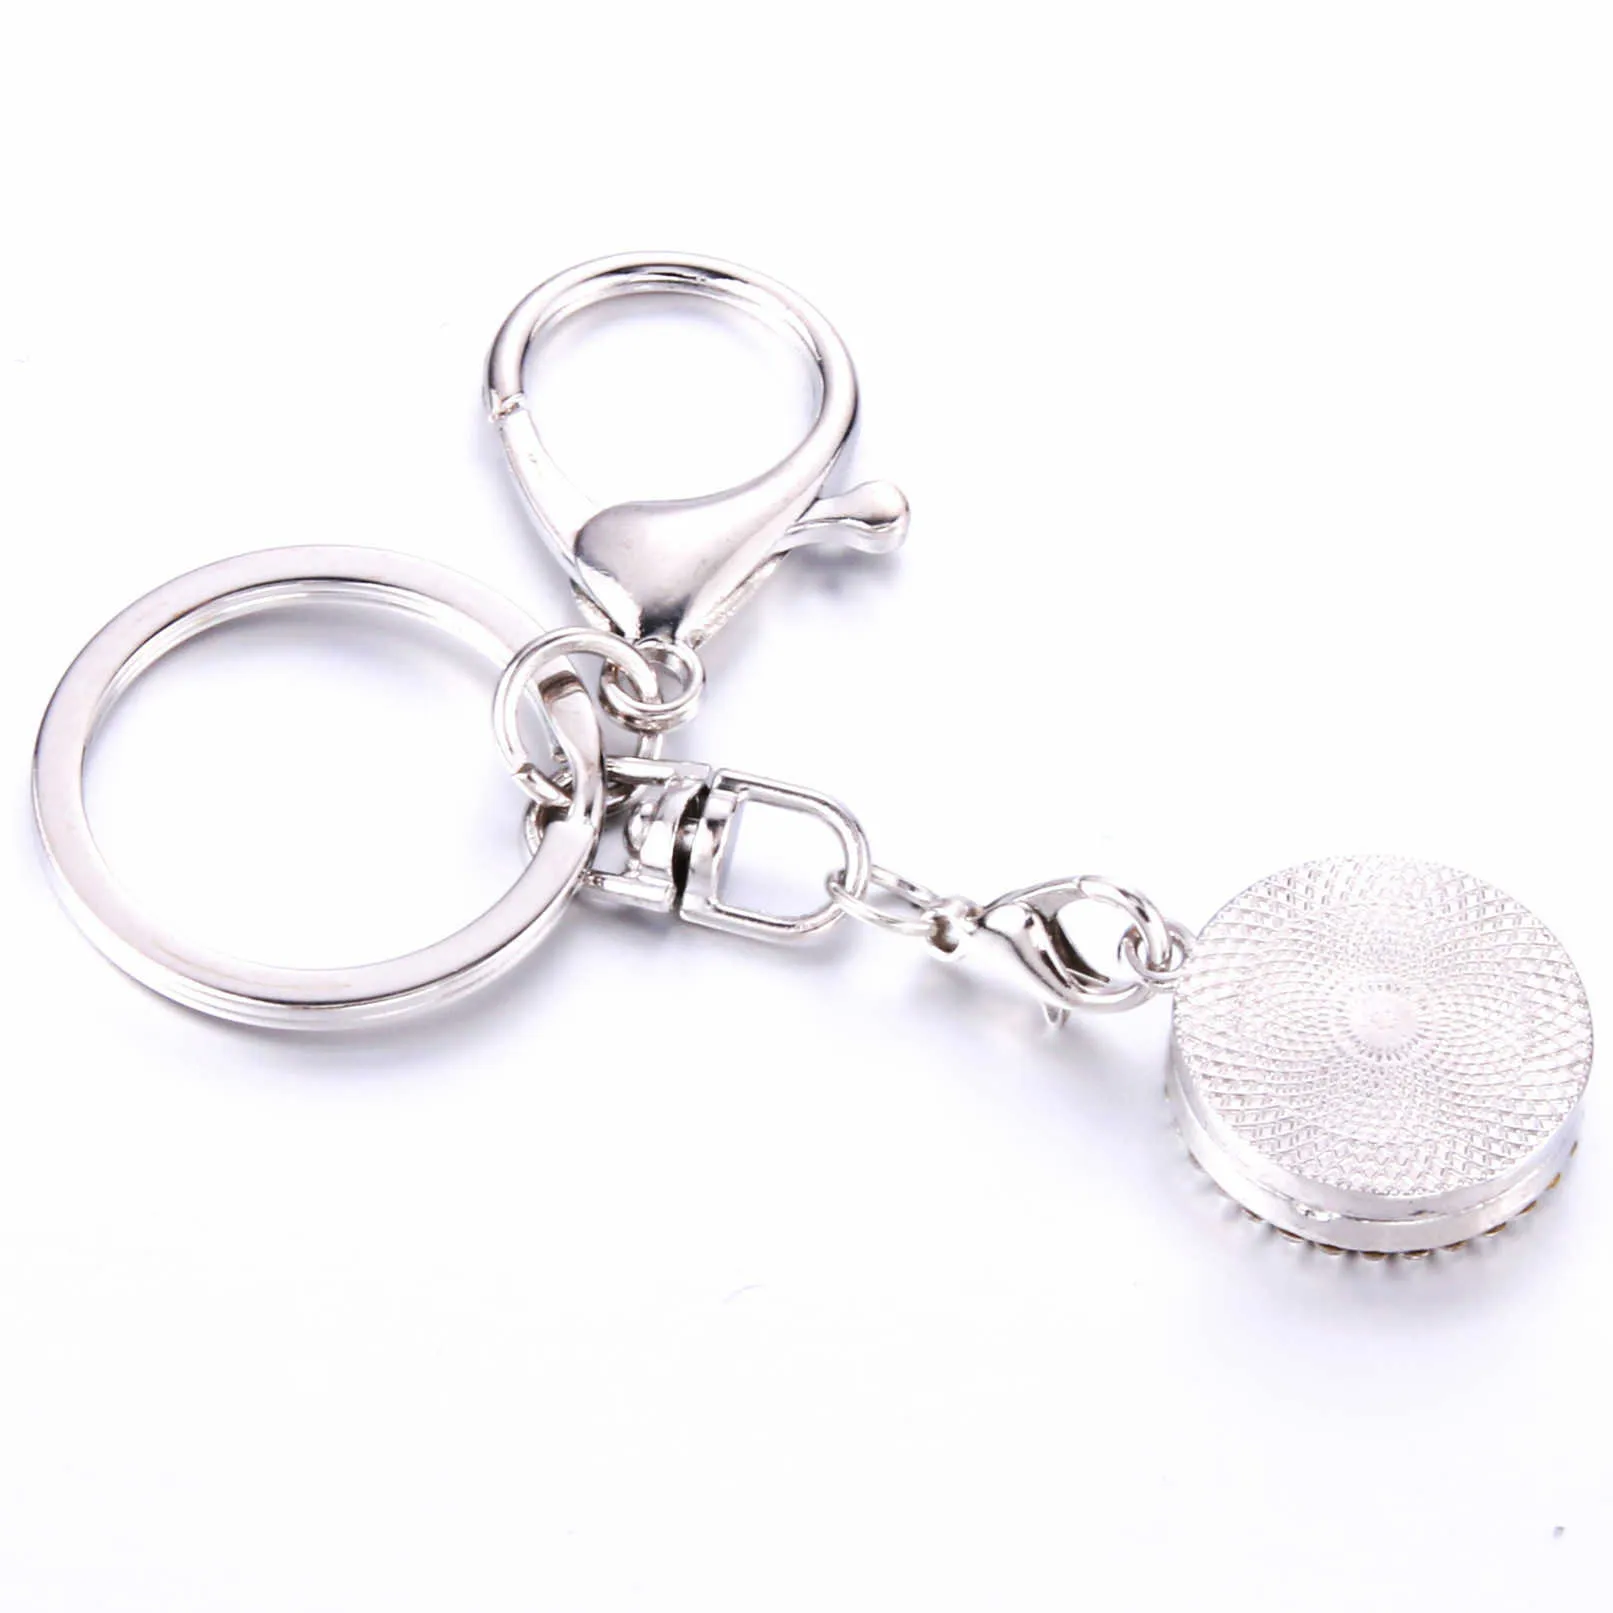 Diamond Inlaid Hollow Stainless Steel Pattern Aromatherapy Essential Oil Magnet Keychain Metal Bag Accessory Car Key Pendant